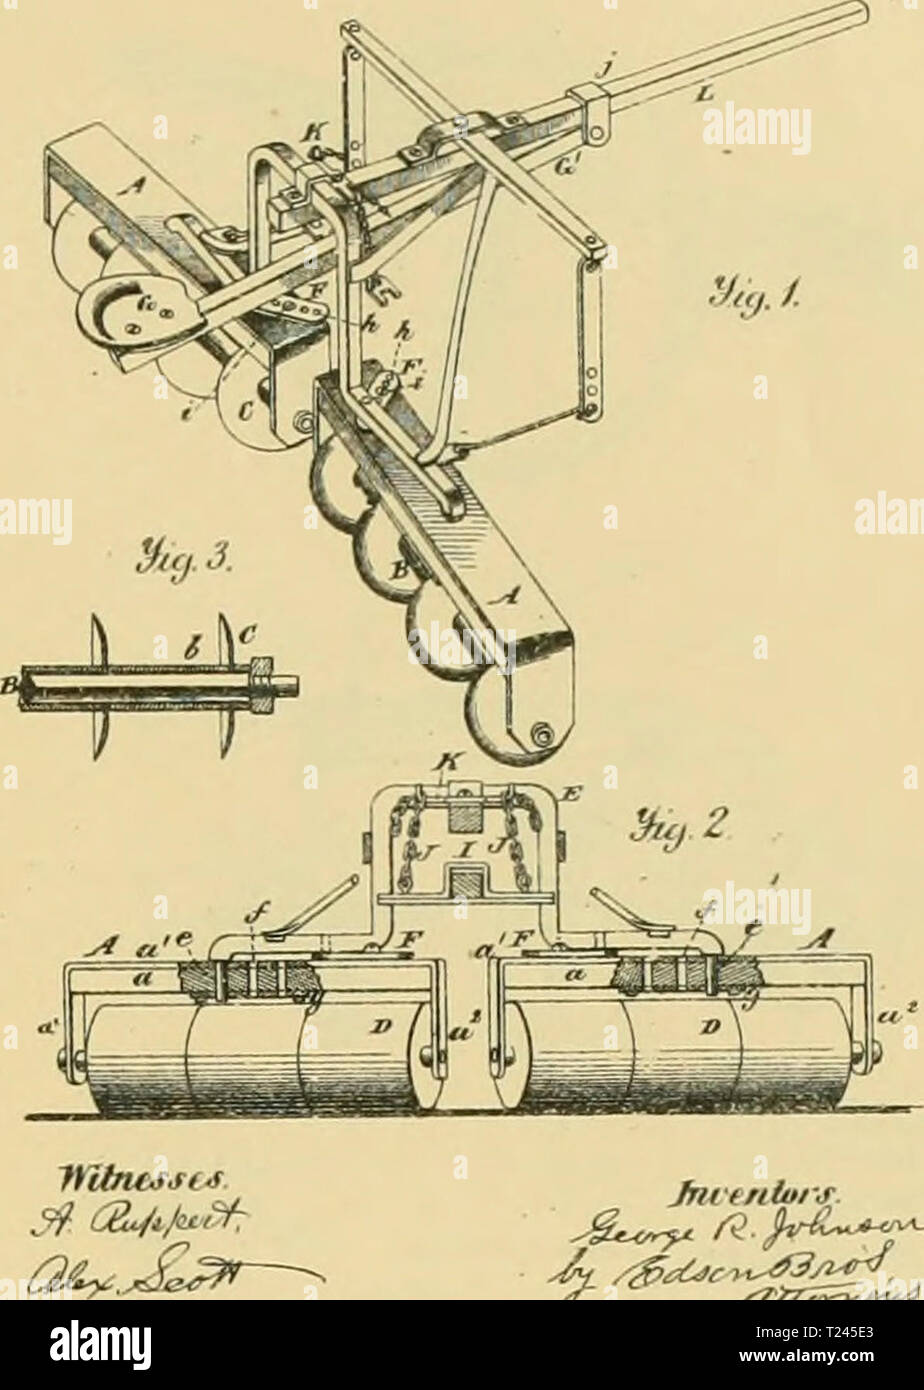 Archive image from page 244 of Digest of agricultural implements, patented Digest of agricultural implements, patented in the United States from A.D. 1789 to July 1881 ..  digestofagricult02alle Year: 1886  No. 225,526 Patented Mar 16 . 1880  yf-Q,.    Jnvtniors- C. La DOW. Combined Seeder and Caltivator No. 226.233. Patented April 6. 18 0. La DOW Combined Seeder and Cultivator No. 226,233. Patented April o. 1880. Stock Photo